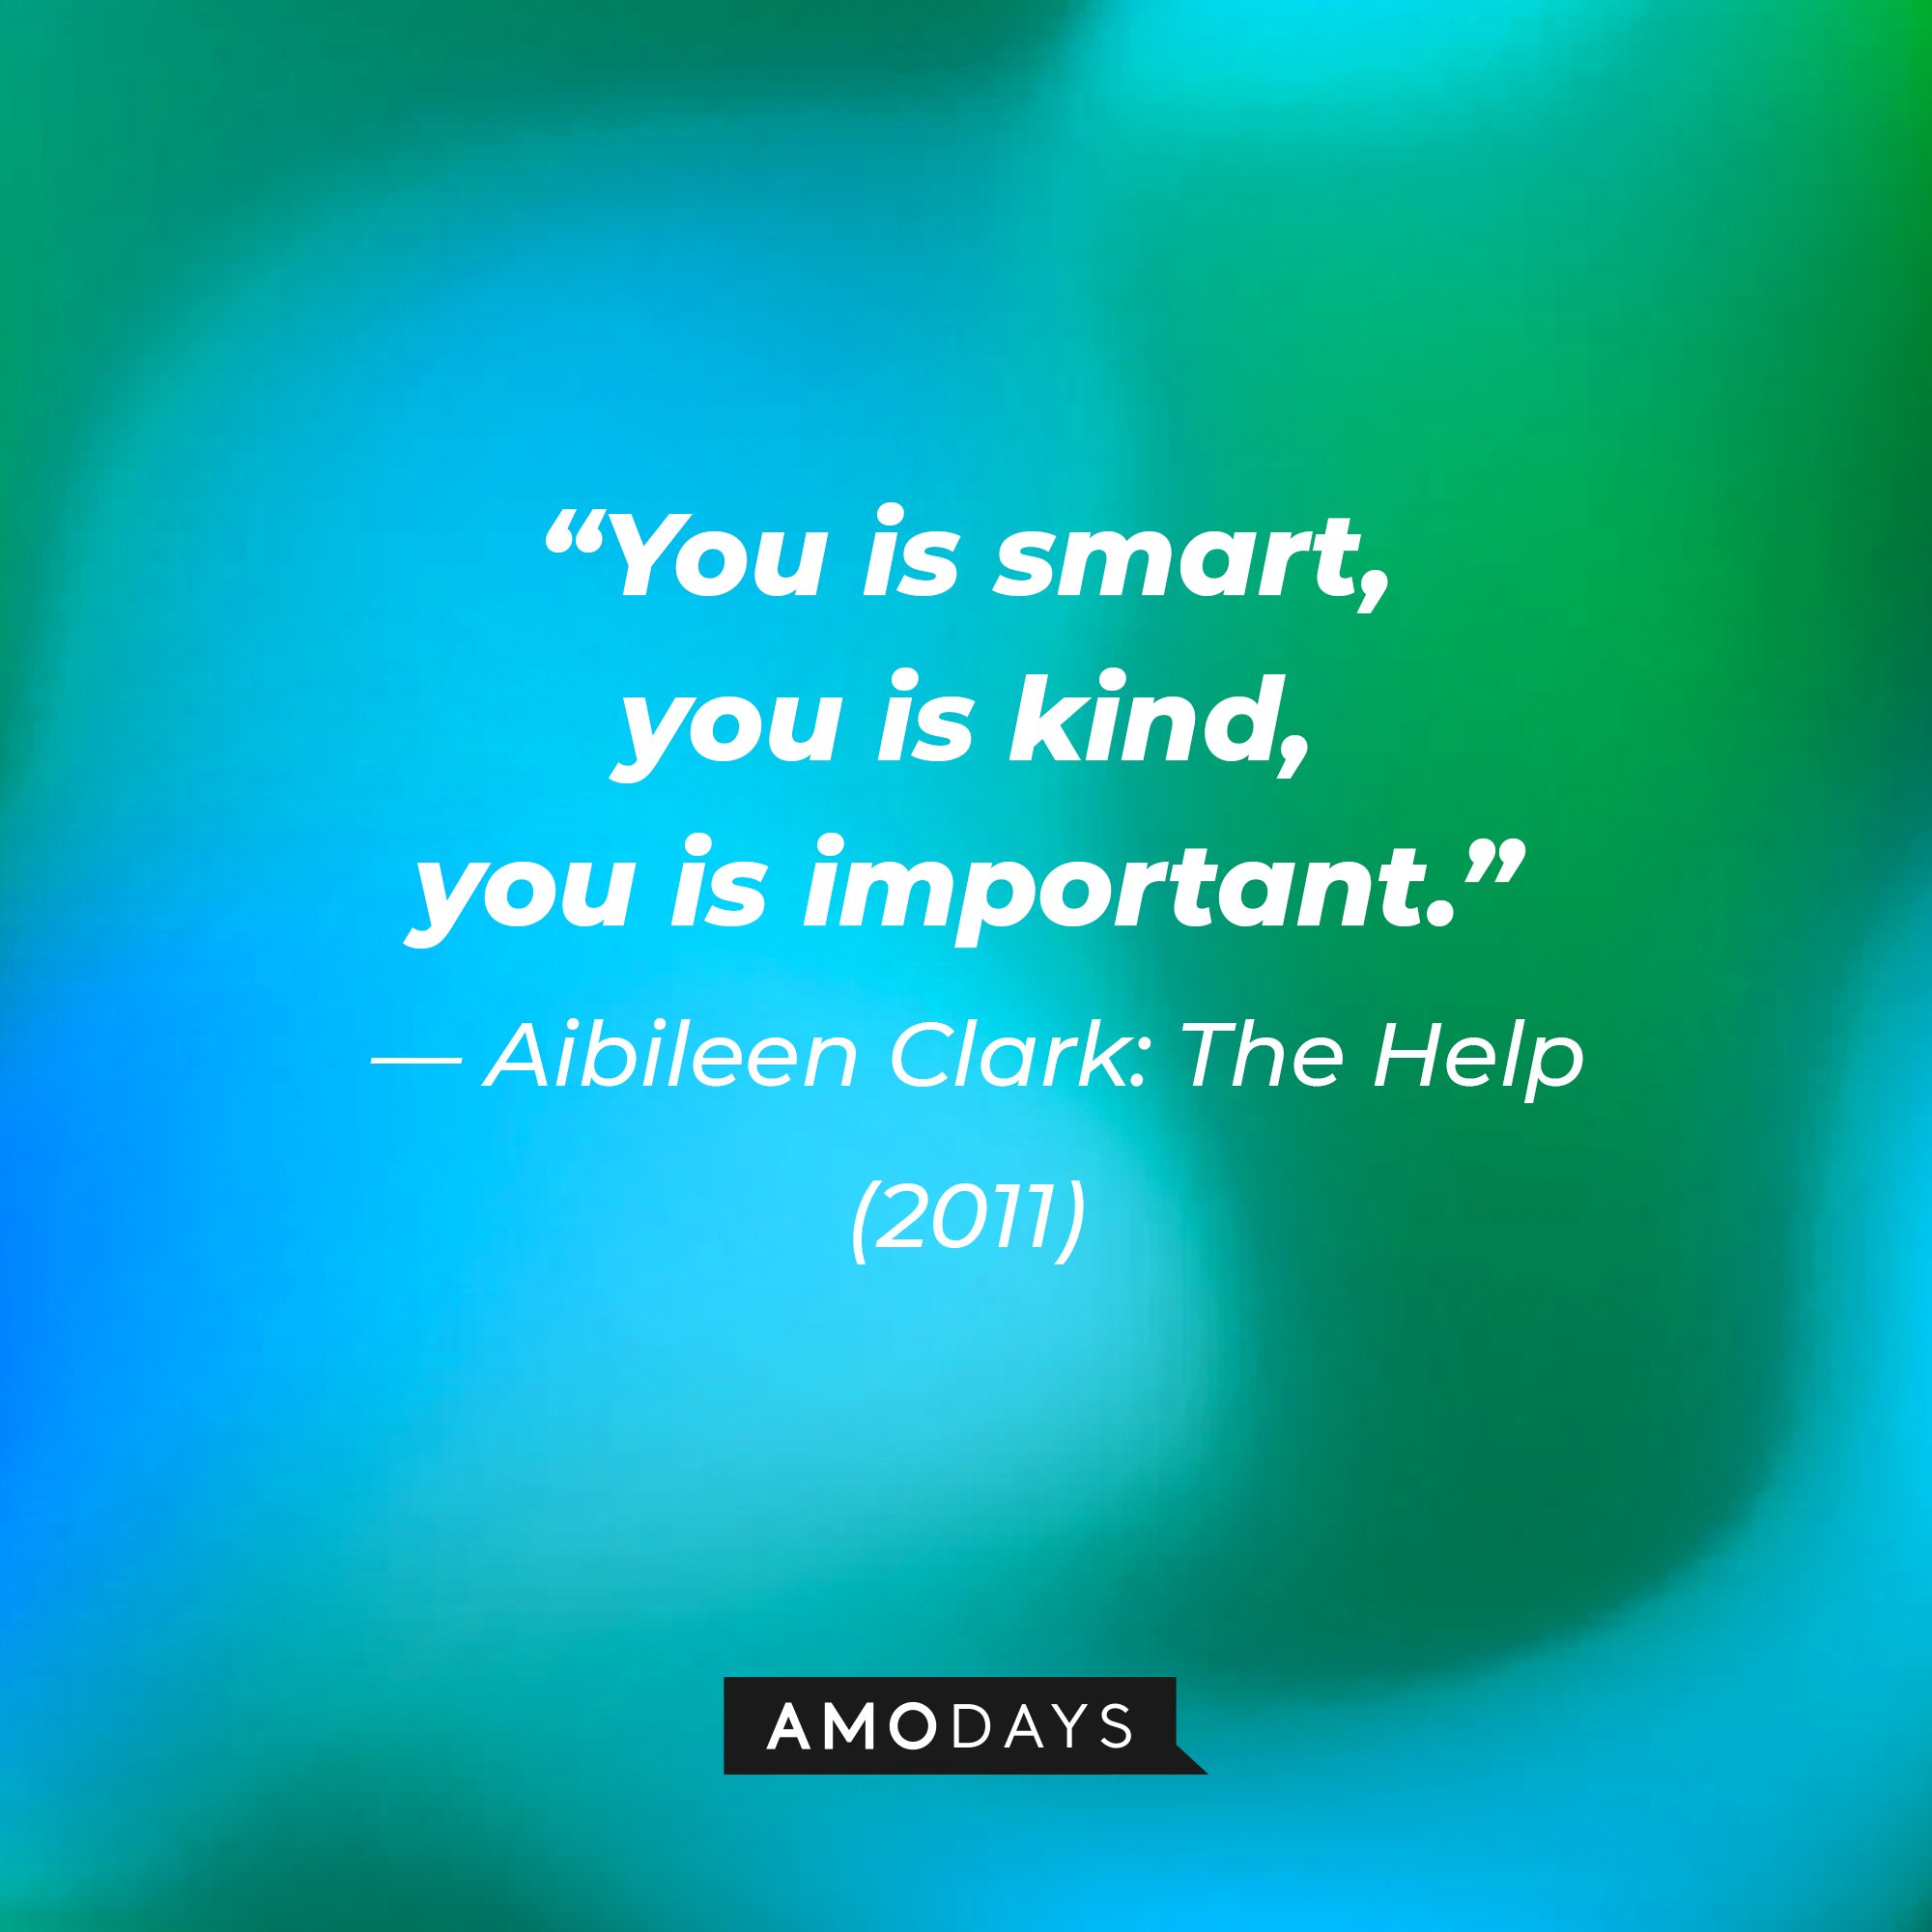  Aibileen Clark from “The Help’s (2011)” quote:“You is smart, you is kind, you is important." | Image: AmoDays